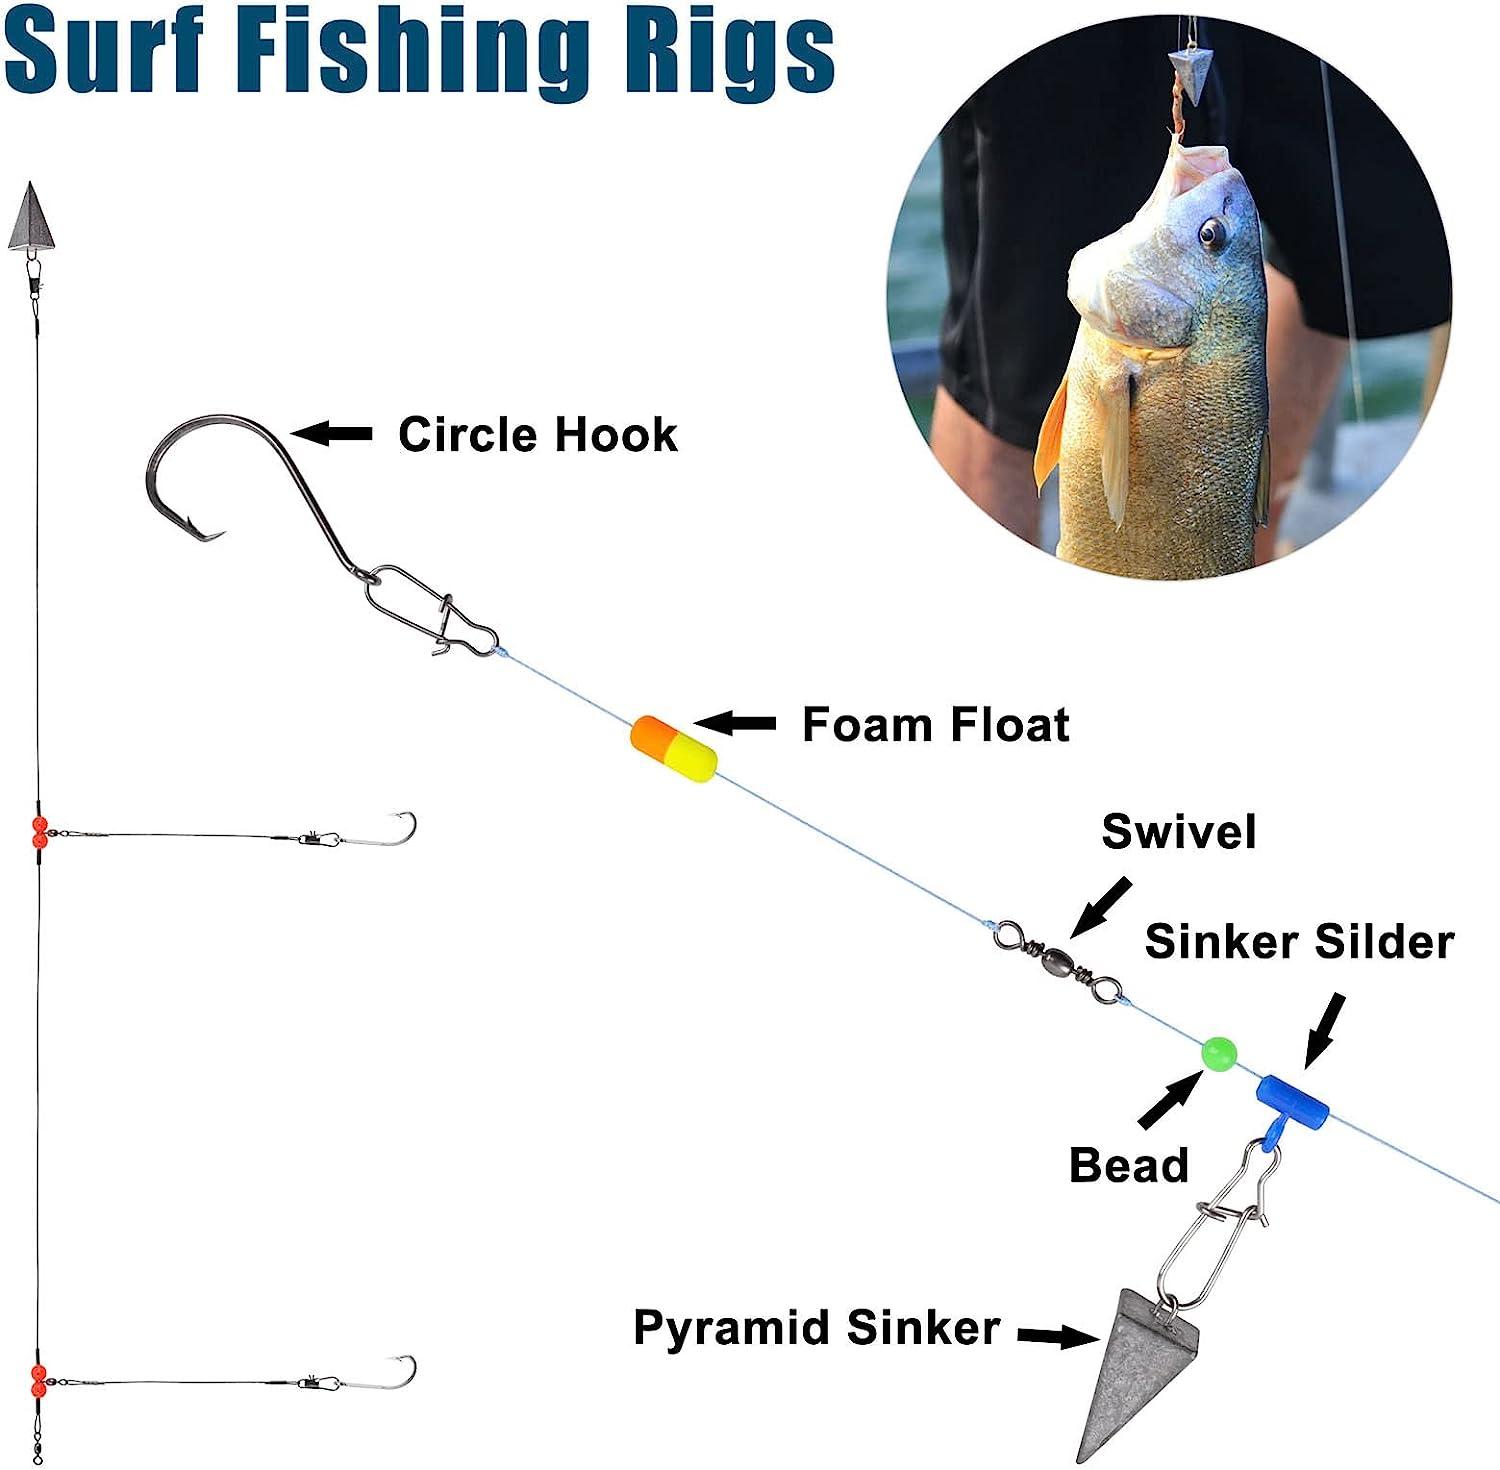 Pompano Rig for Surf Fishing